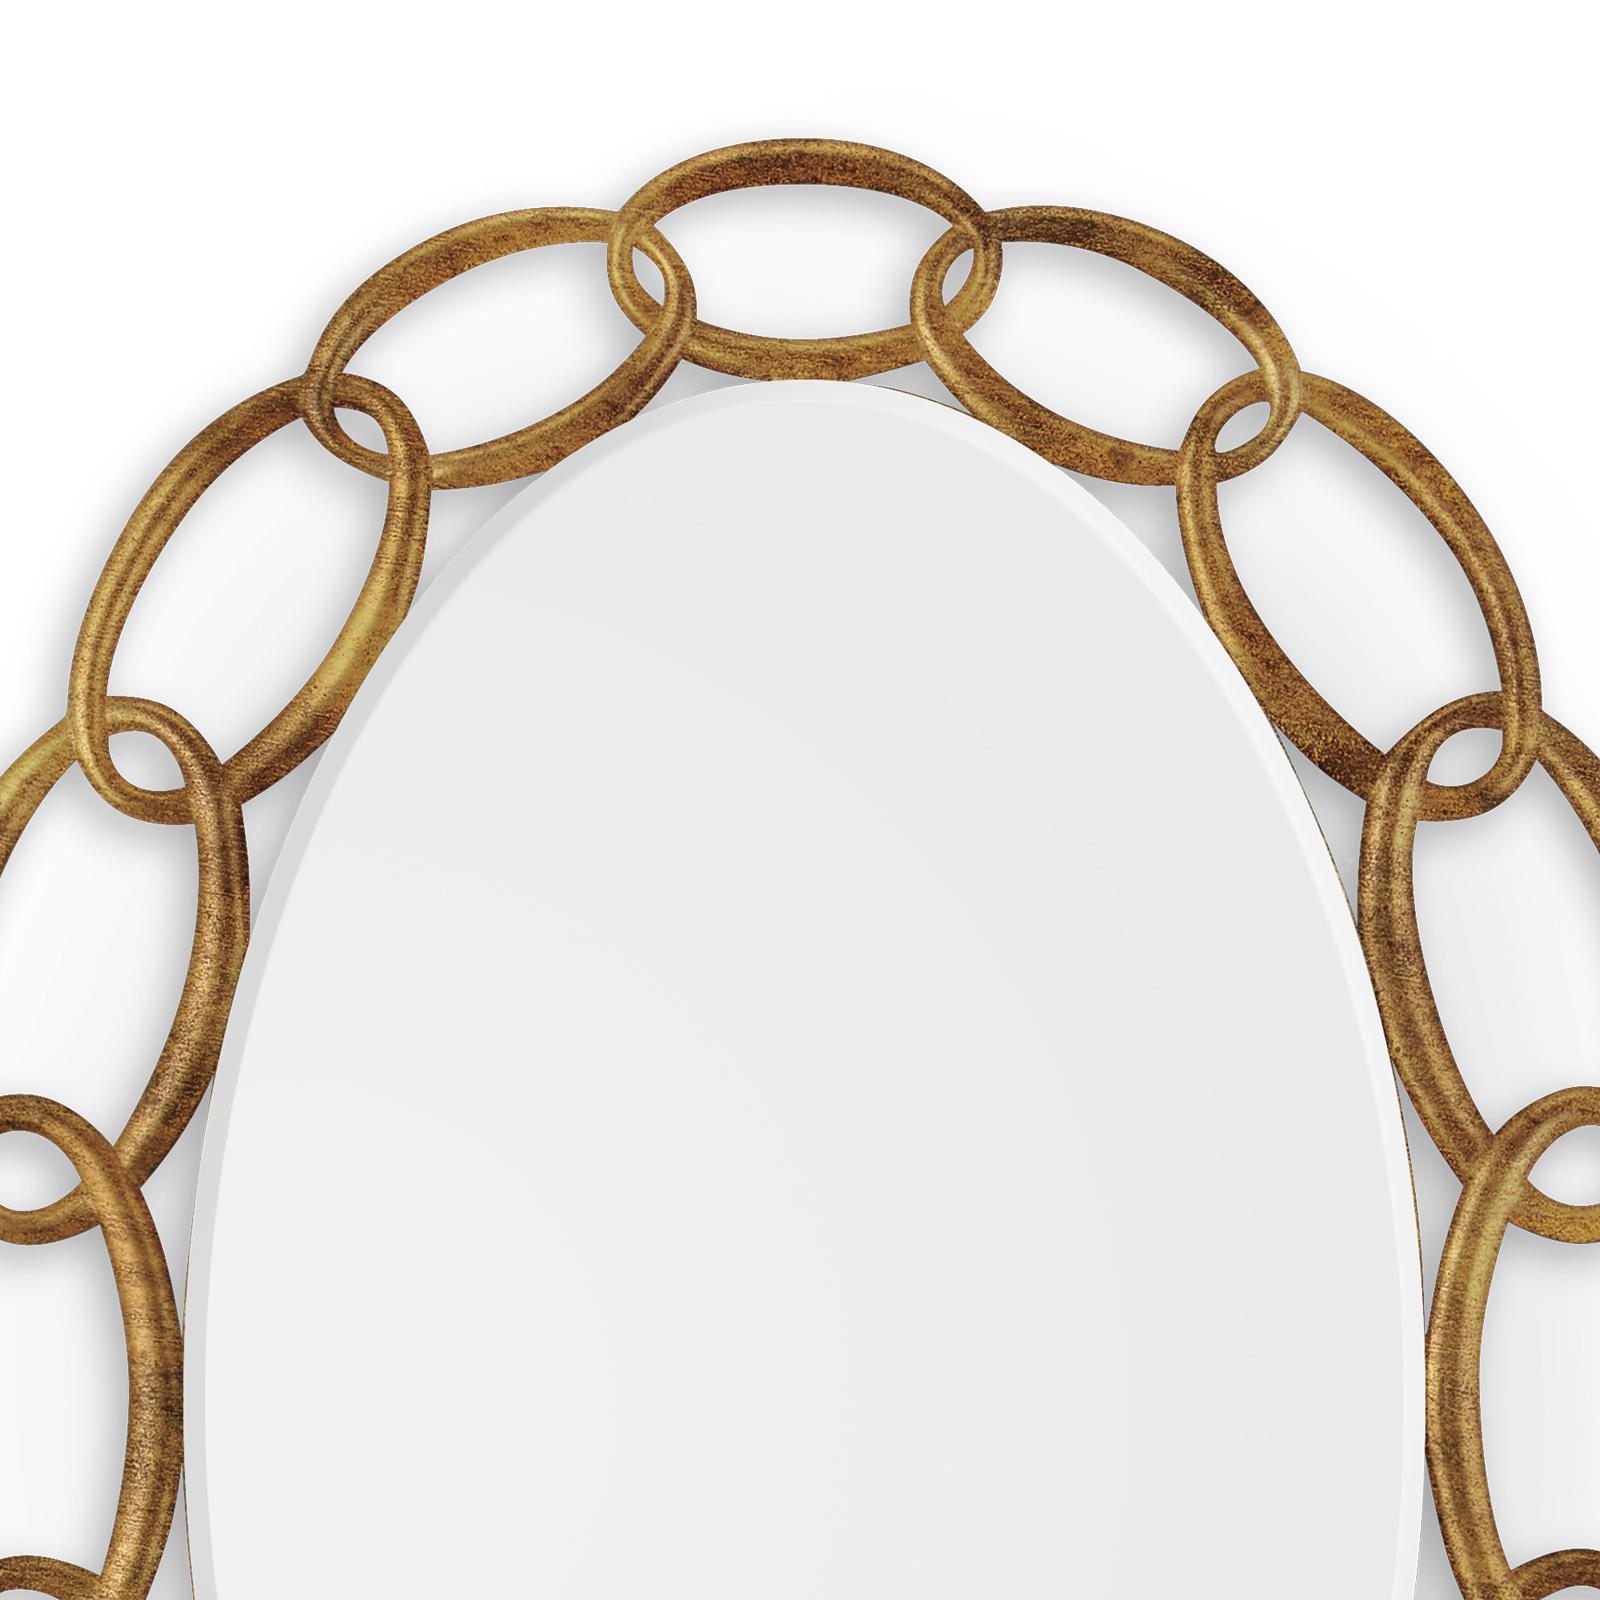 English Chain Mirror in Antique Gold Finish